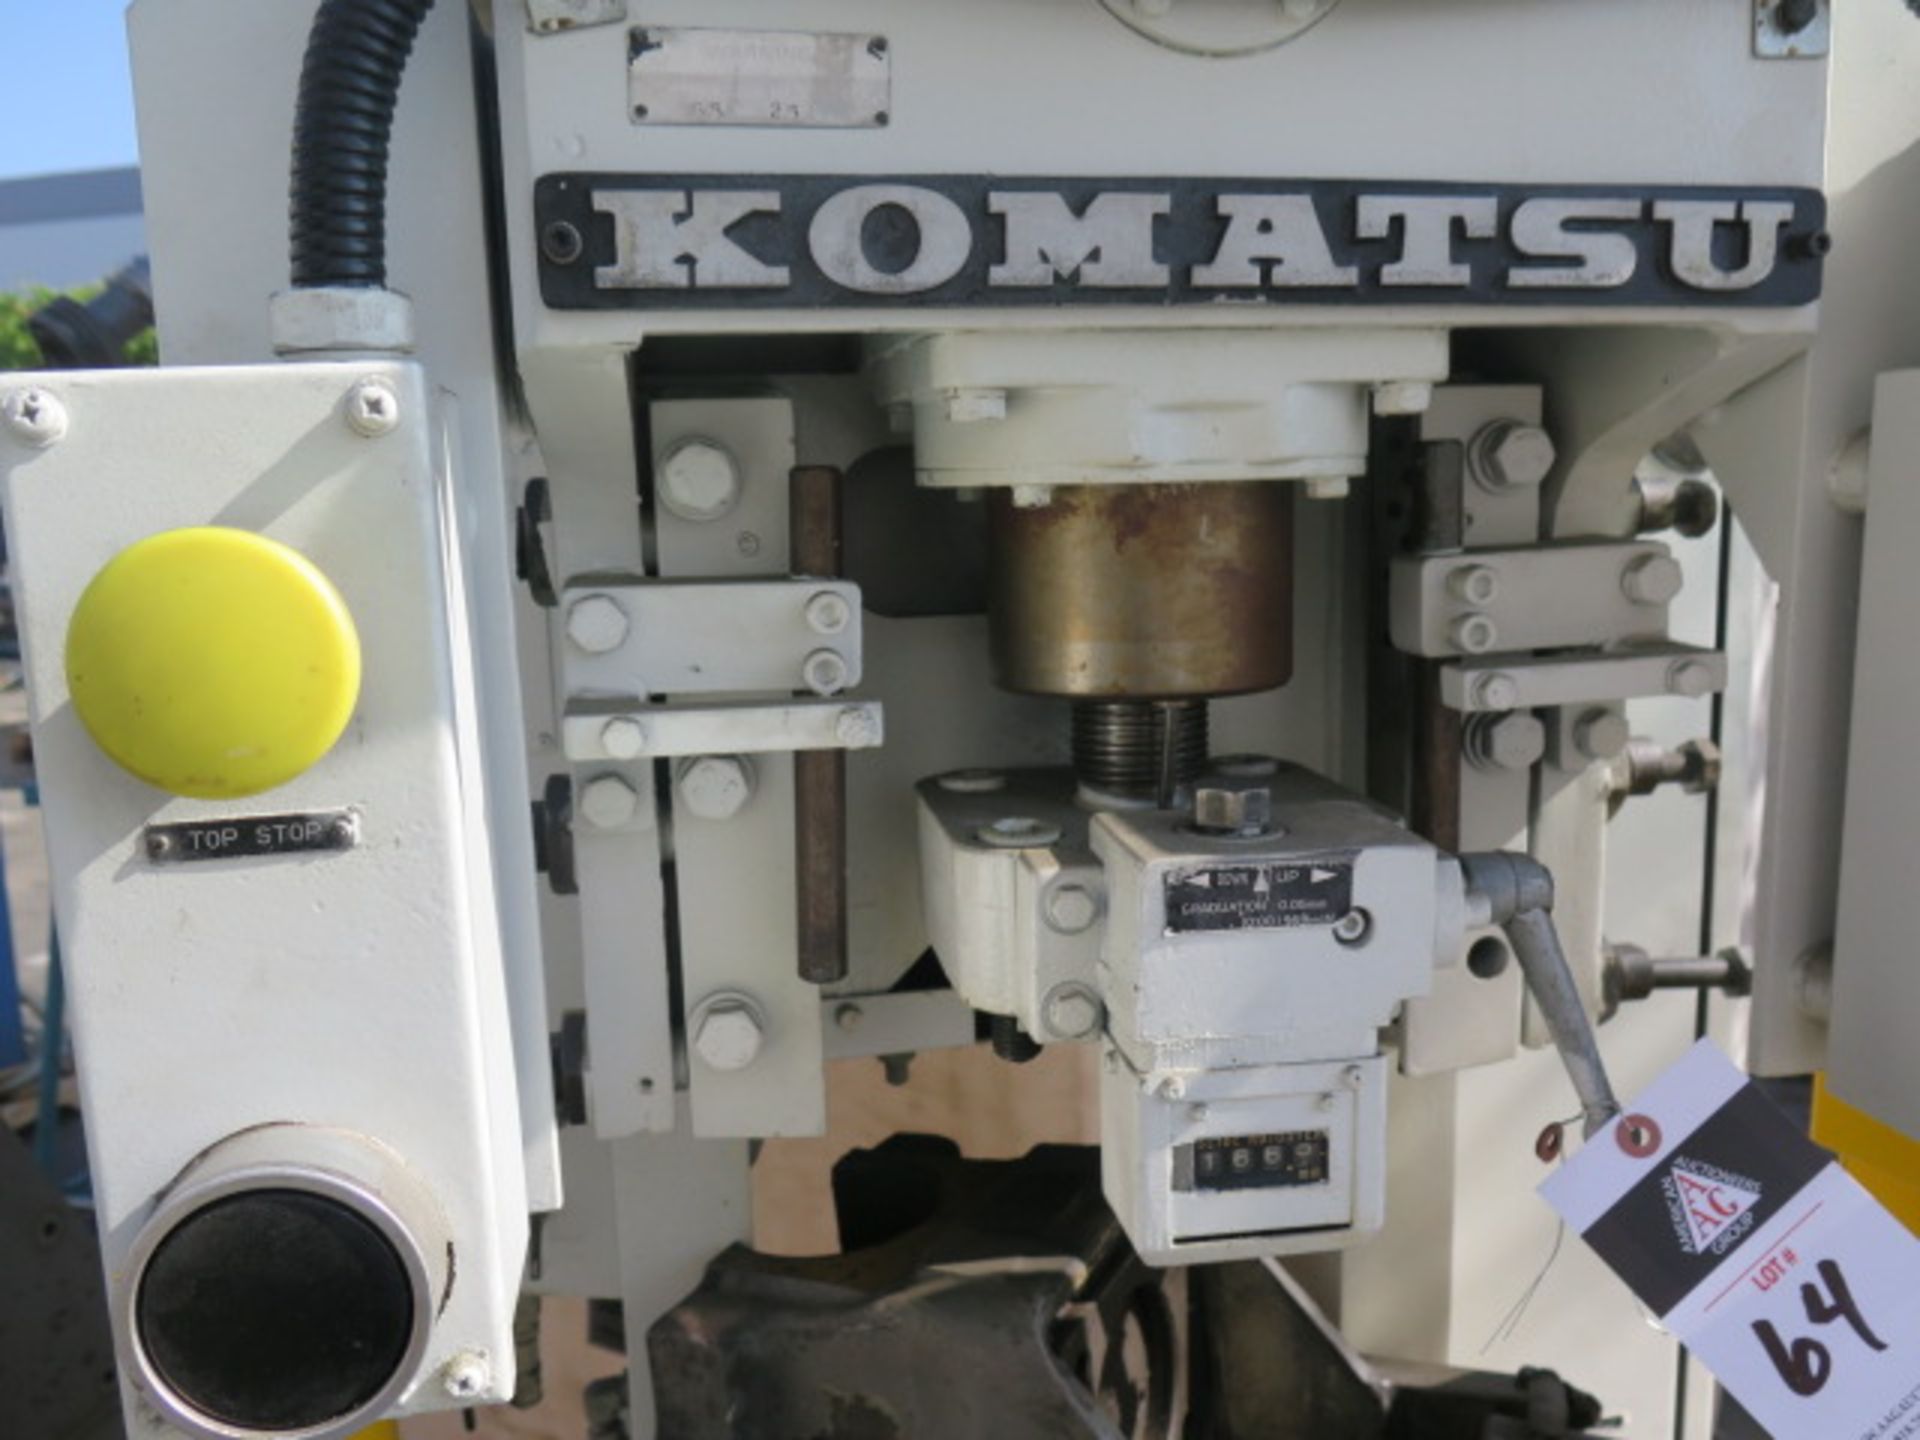 Komatsu OBS25-2 25 Ton Stamping Press (FOR PARTS ONLY - BROKEM RAM) s/n 10676, SOLD AS-IS - NO WARRA - Image 4 of 11